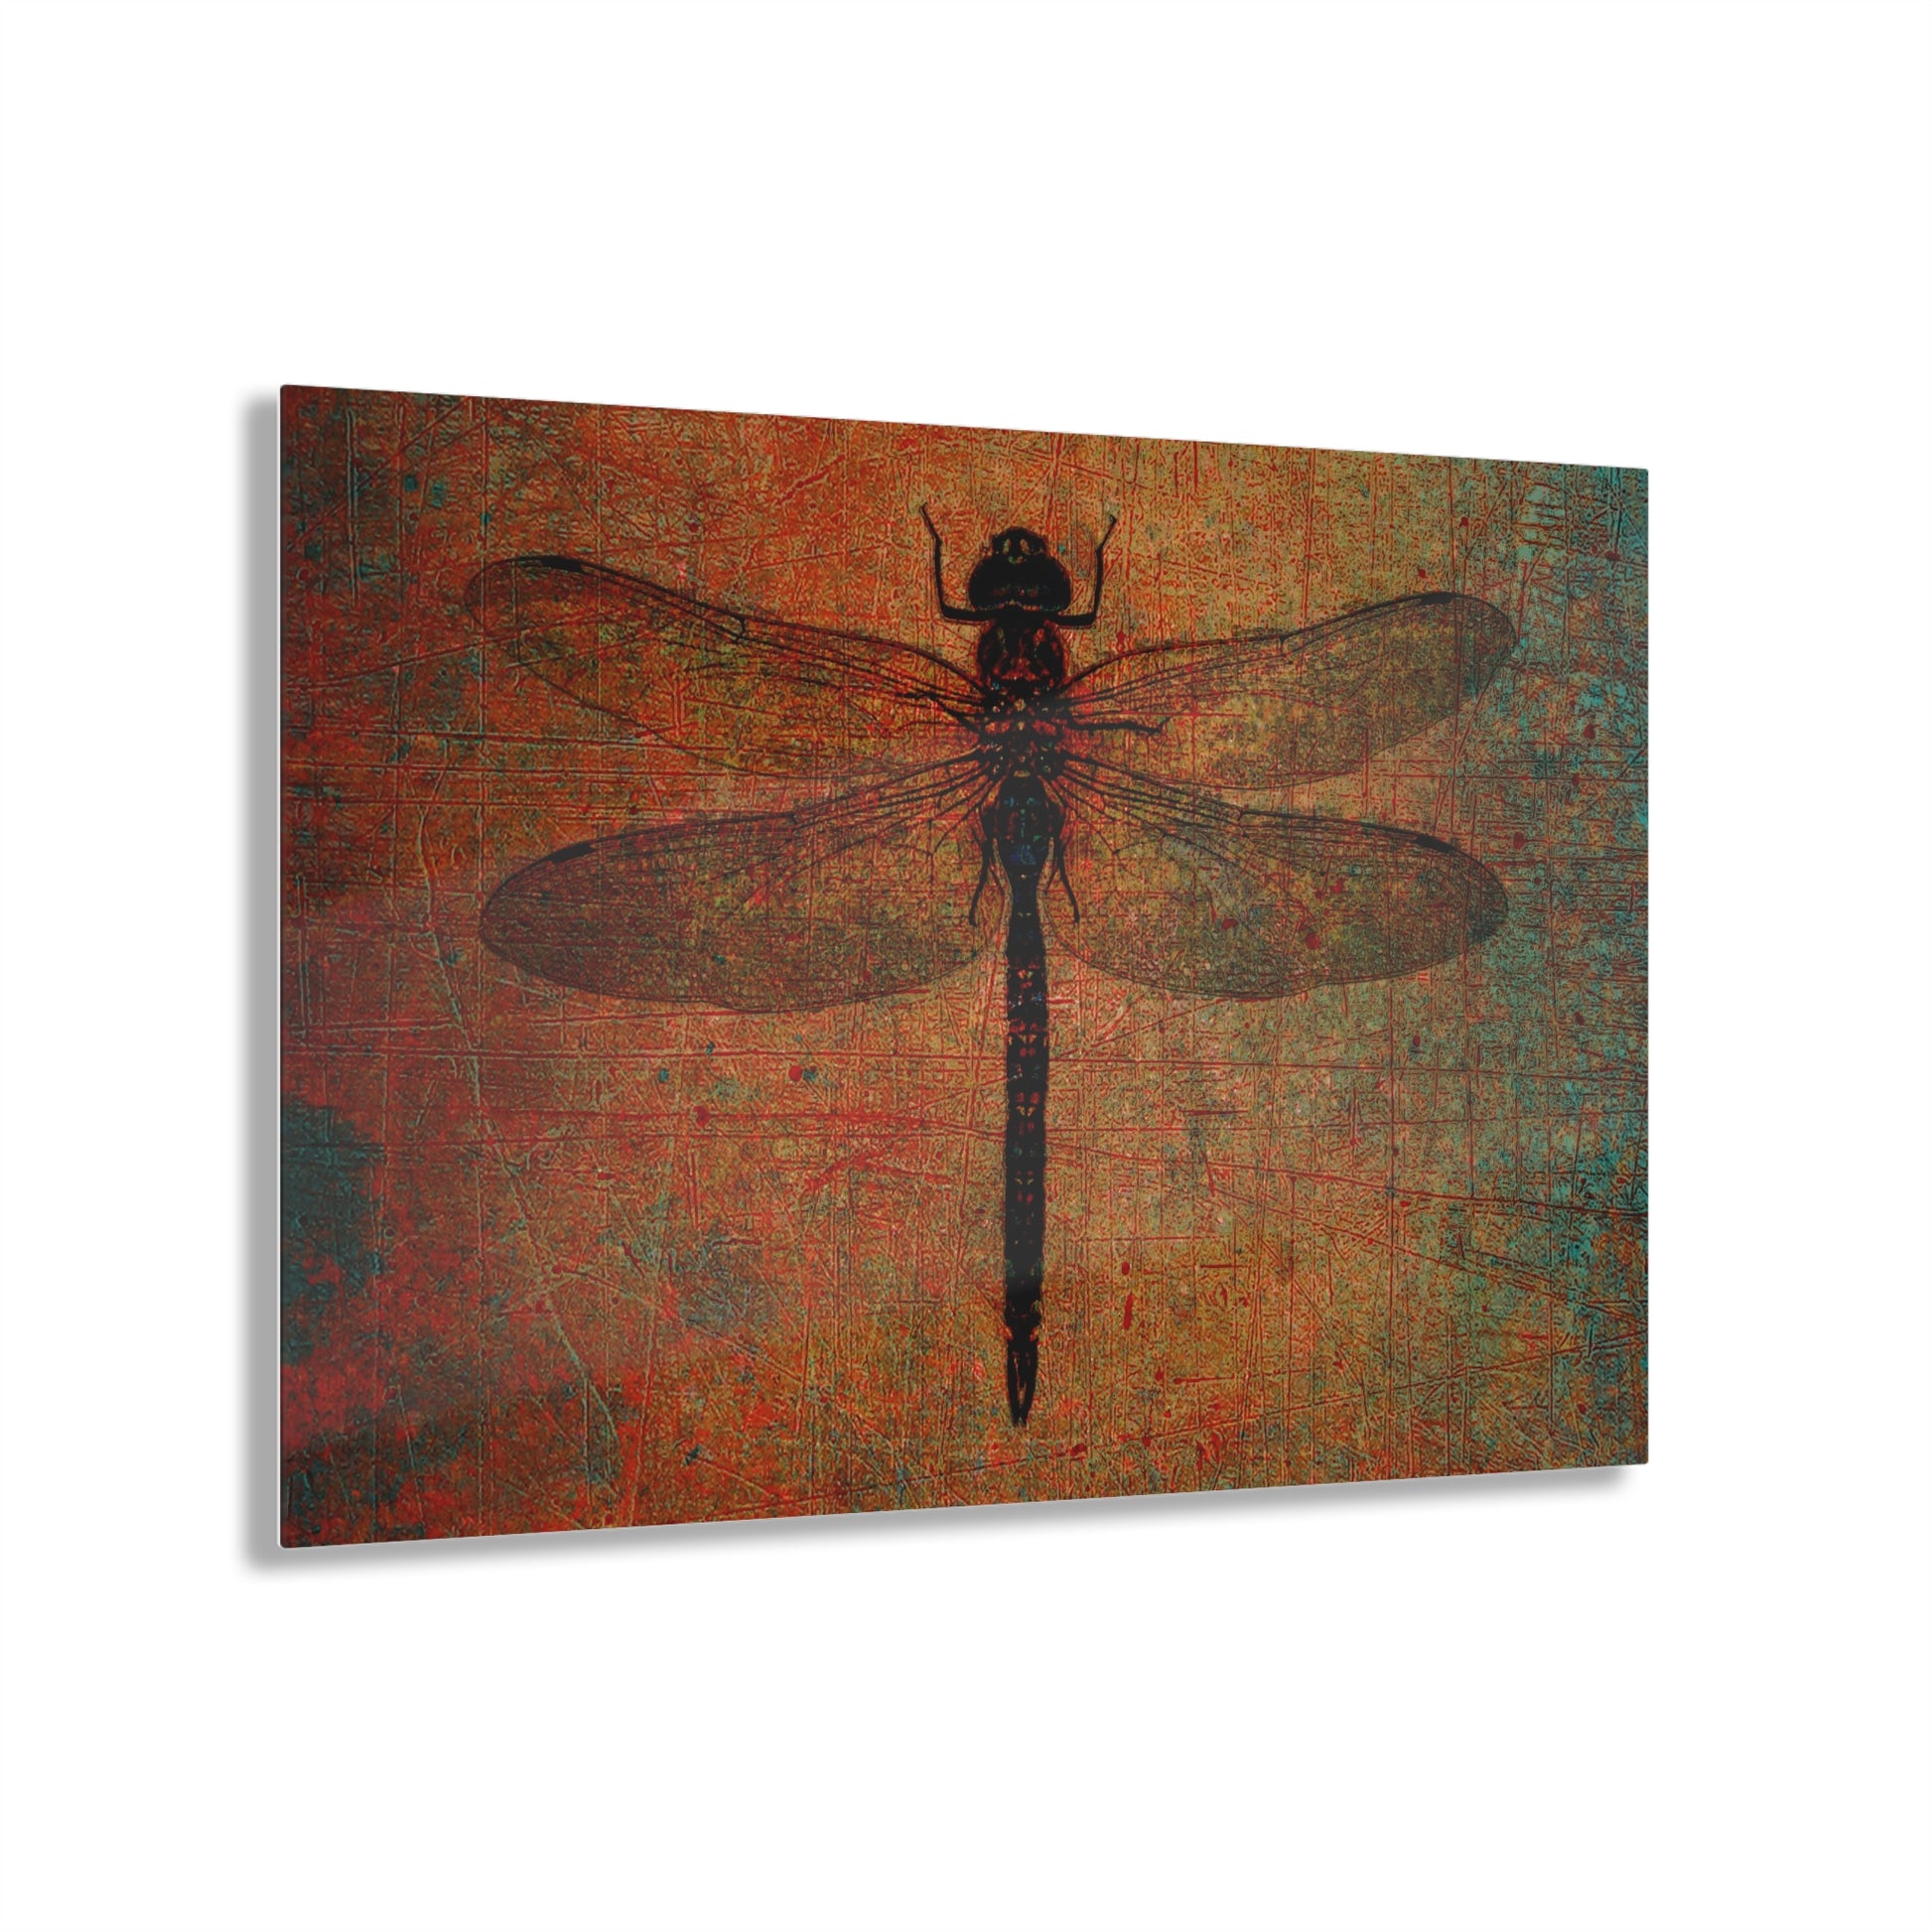 Dragonfly on Distressed Brown Stone Background on a Crystal Clear Acrylic Panel 36x24 